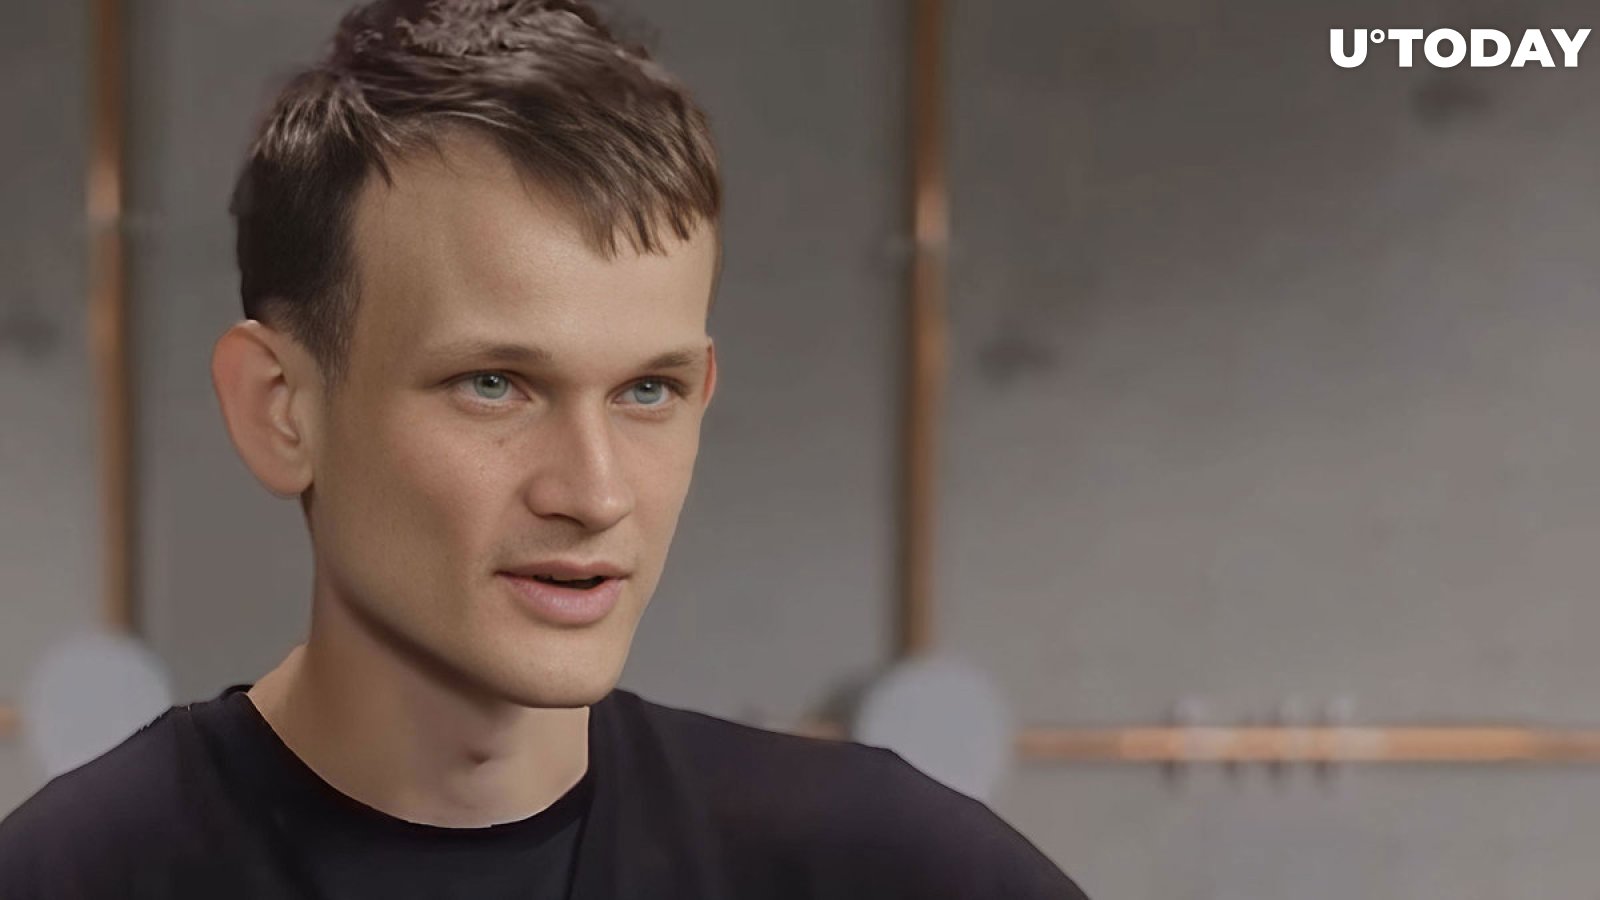 Vitalik Buterin Revealed Ethereum's Biggest Bug and Way to Fix It